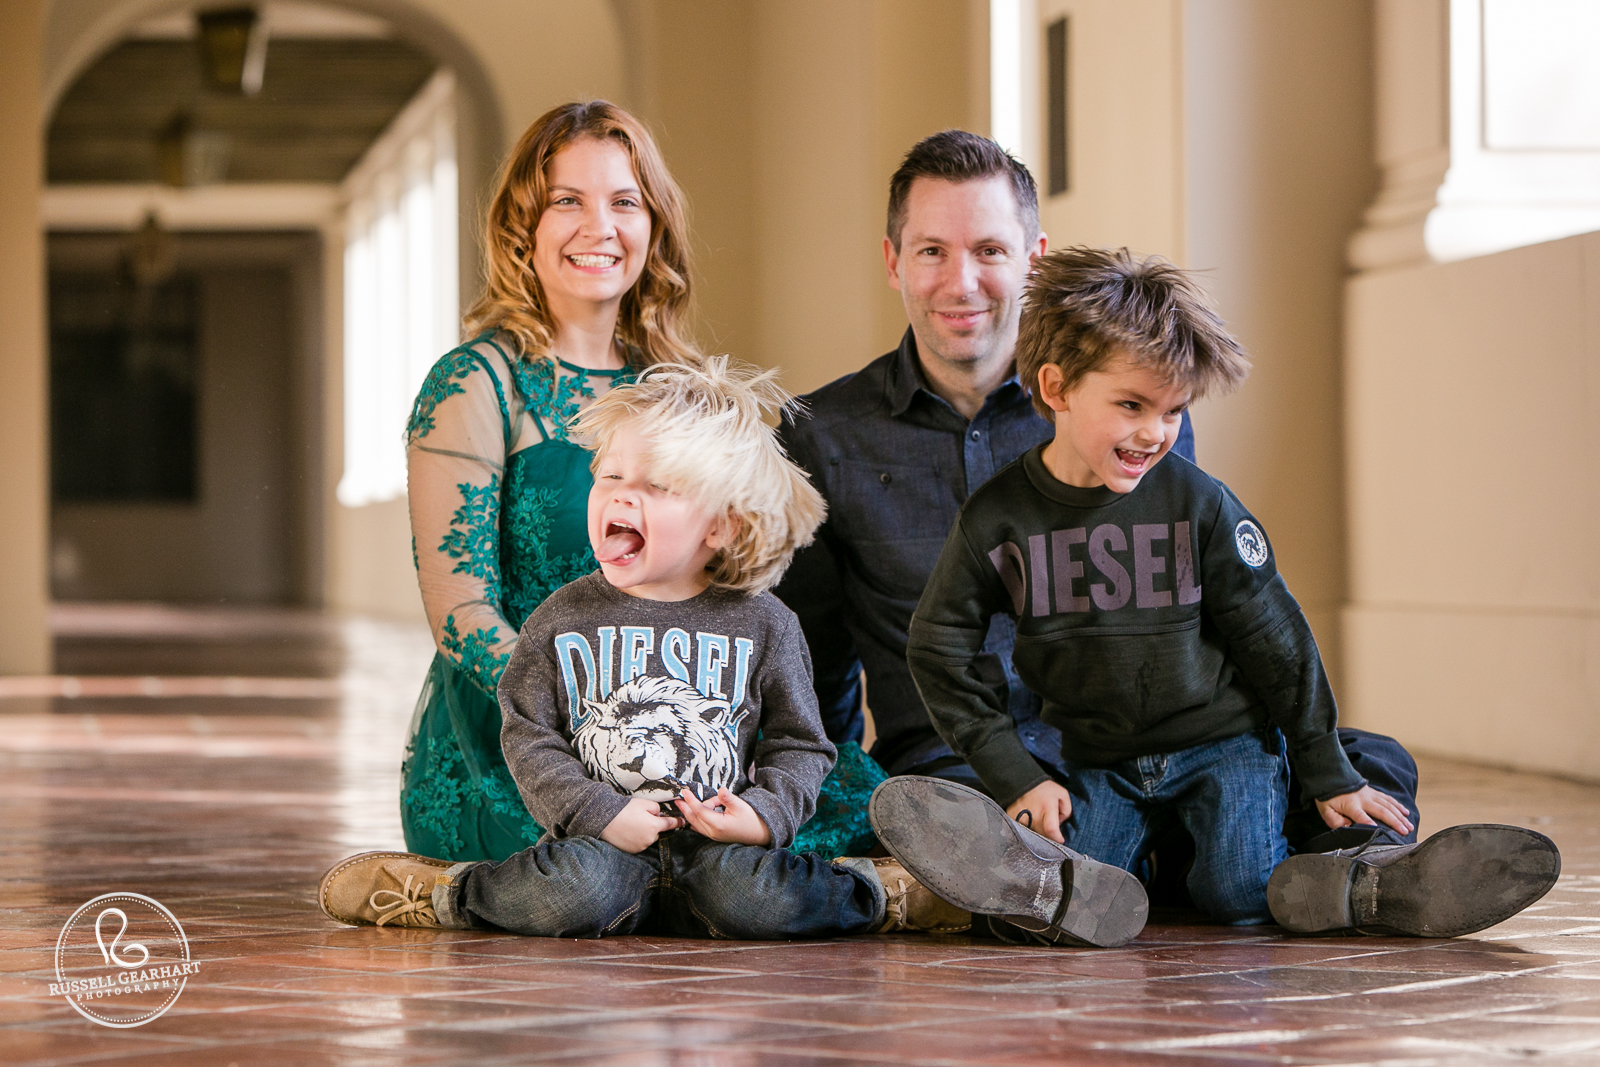 Pasadena Family Portrait: Hayes Family – Russell Gearhart Photography – www.gearhartphoto.com